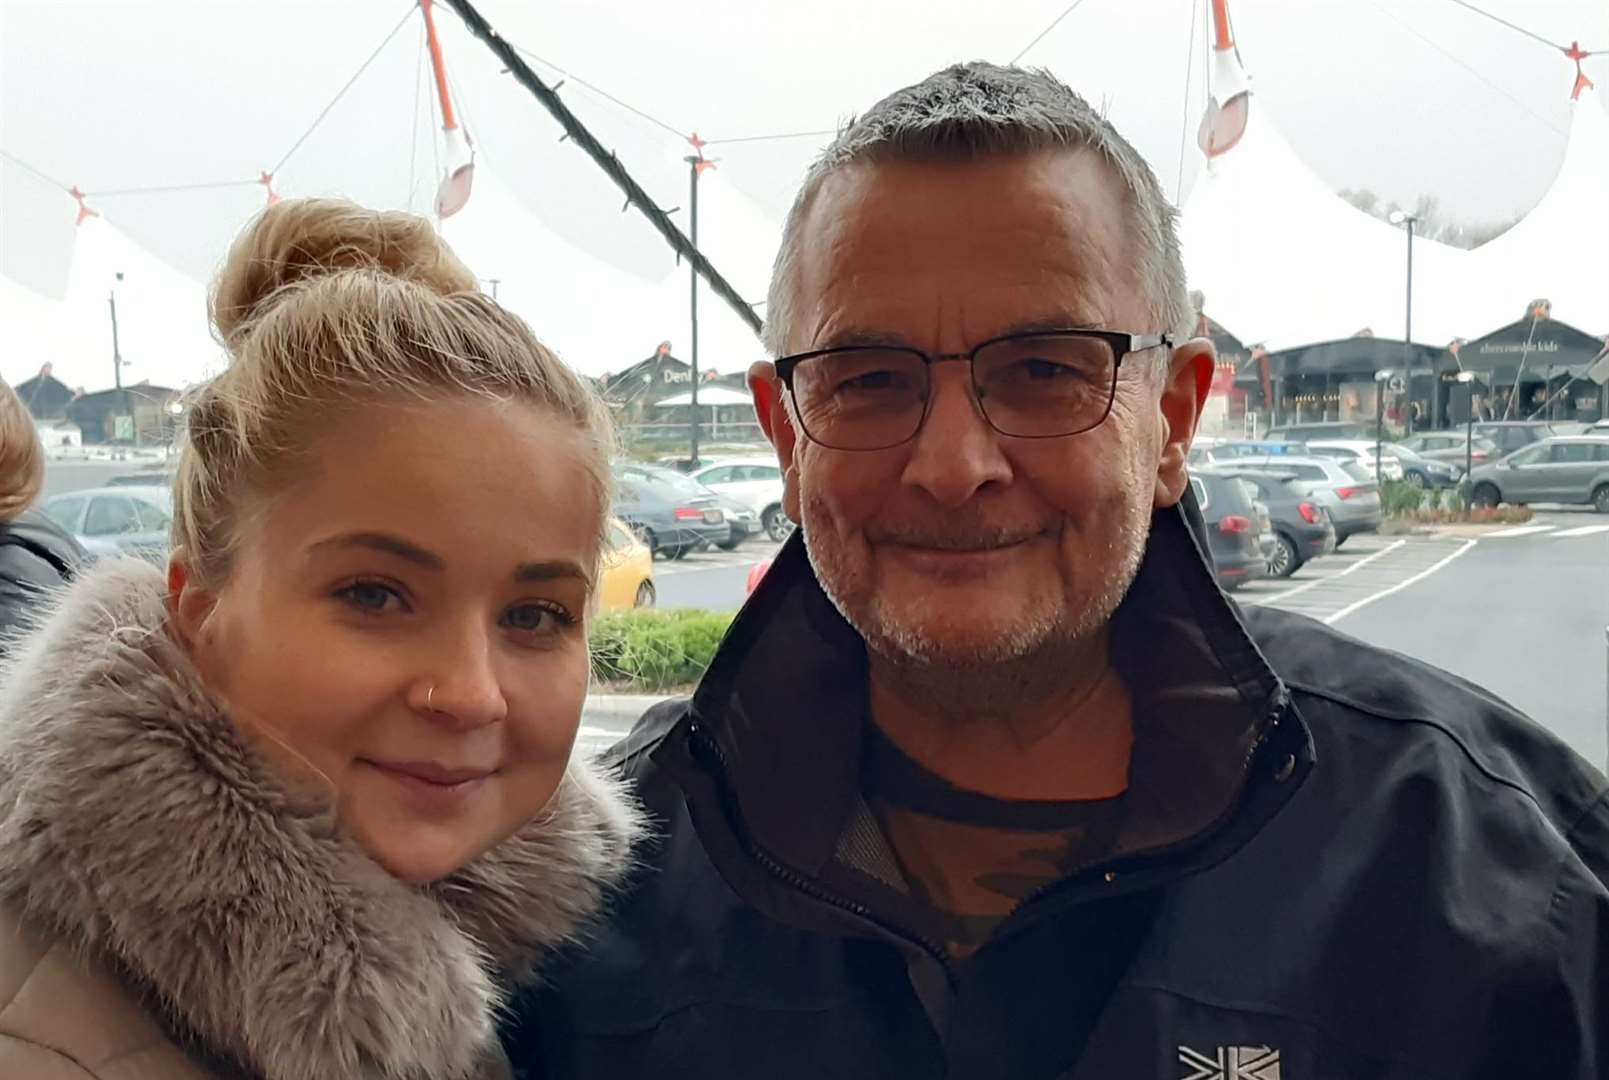 Jodie Buttle, 23, and dad Clive were among the first people through the doors of Ashford's new Haribo store